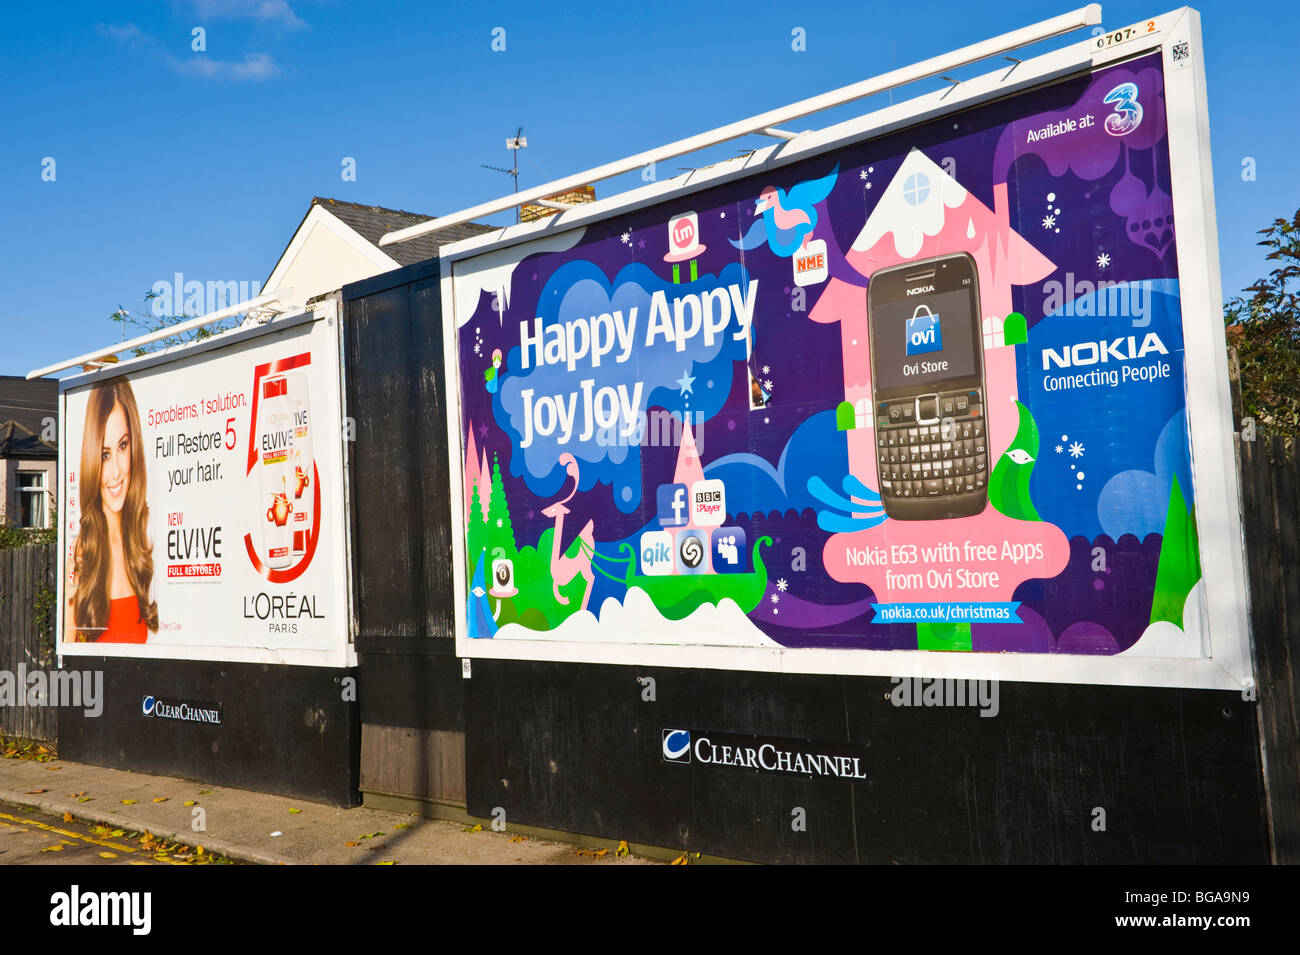 ClearChannel billboard site featuring poster for Nokia mobile phones next to Cheryl Cole L'Oreal ad in Newport South Wales UK Stock Photo